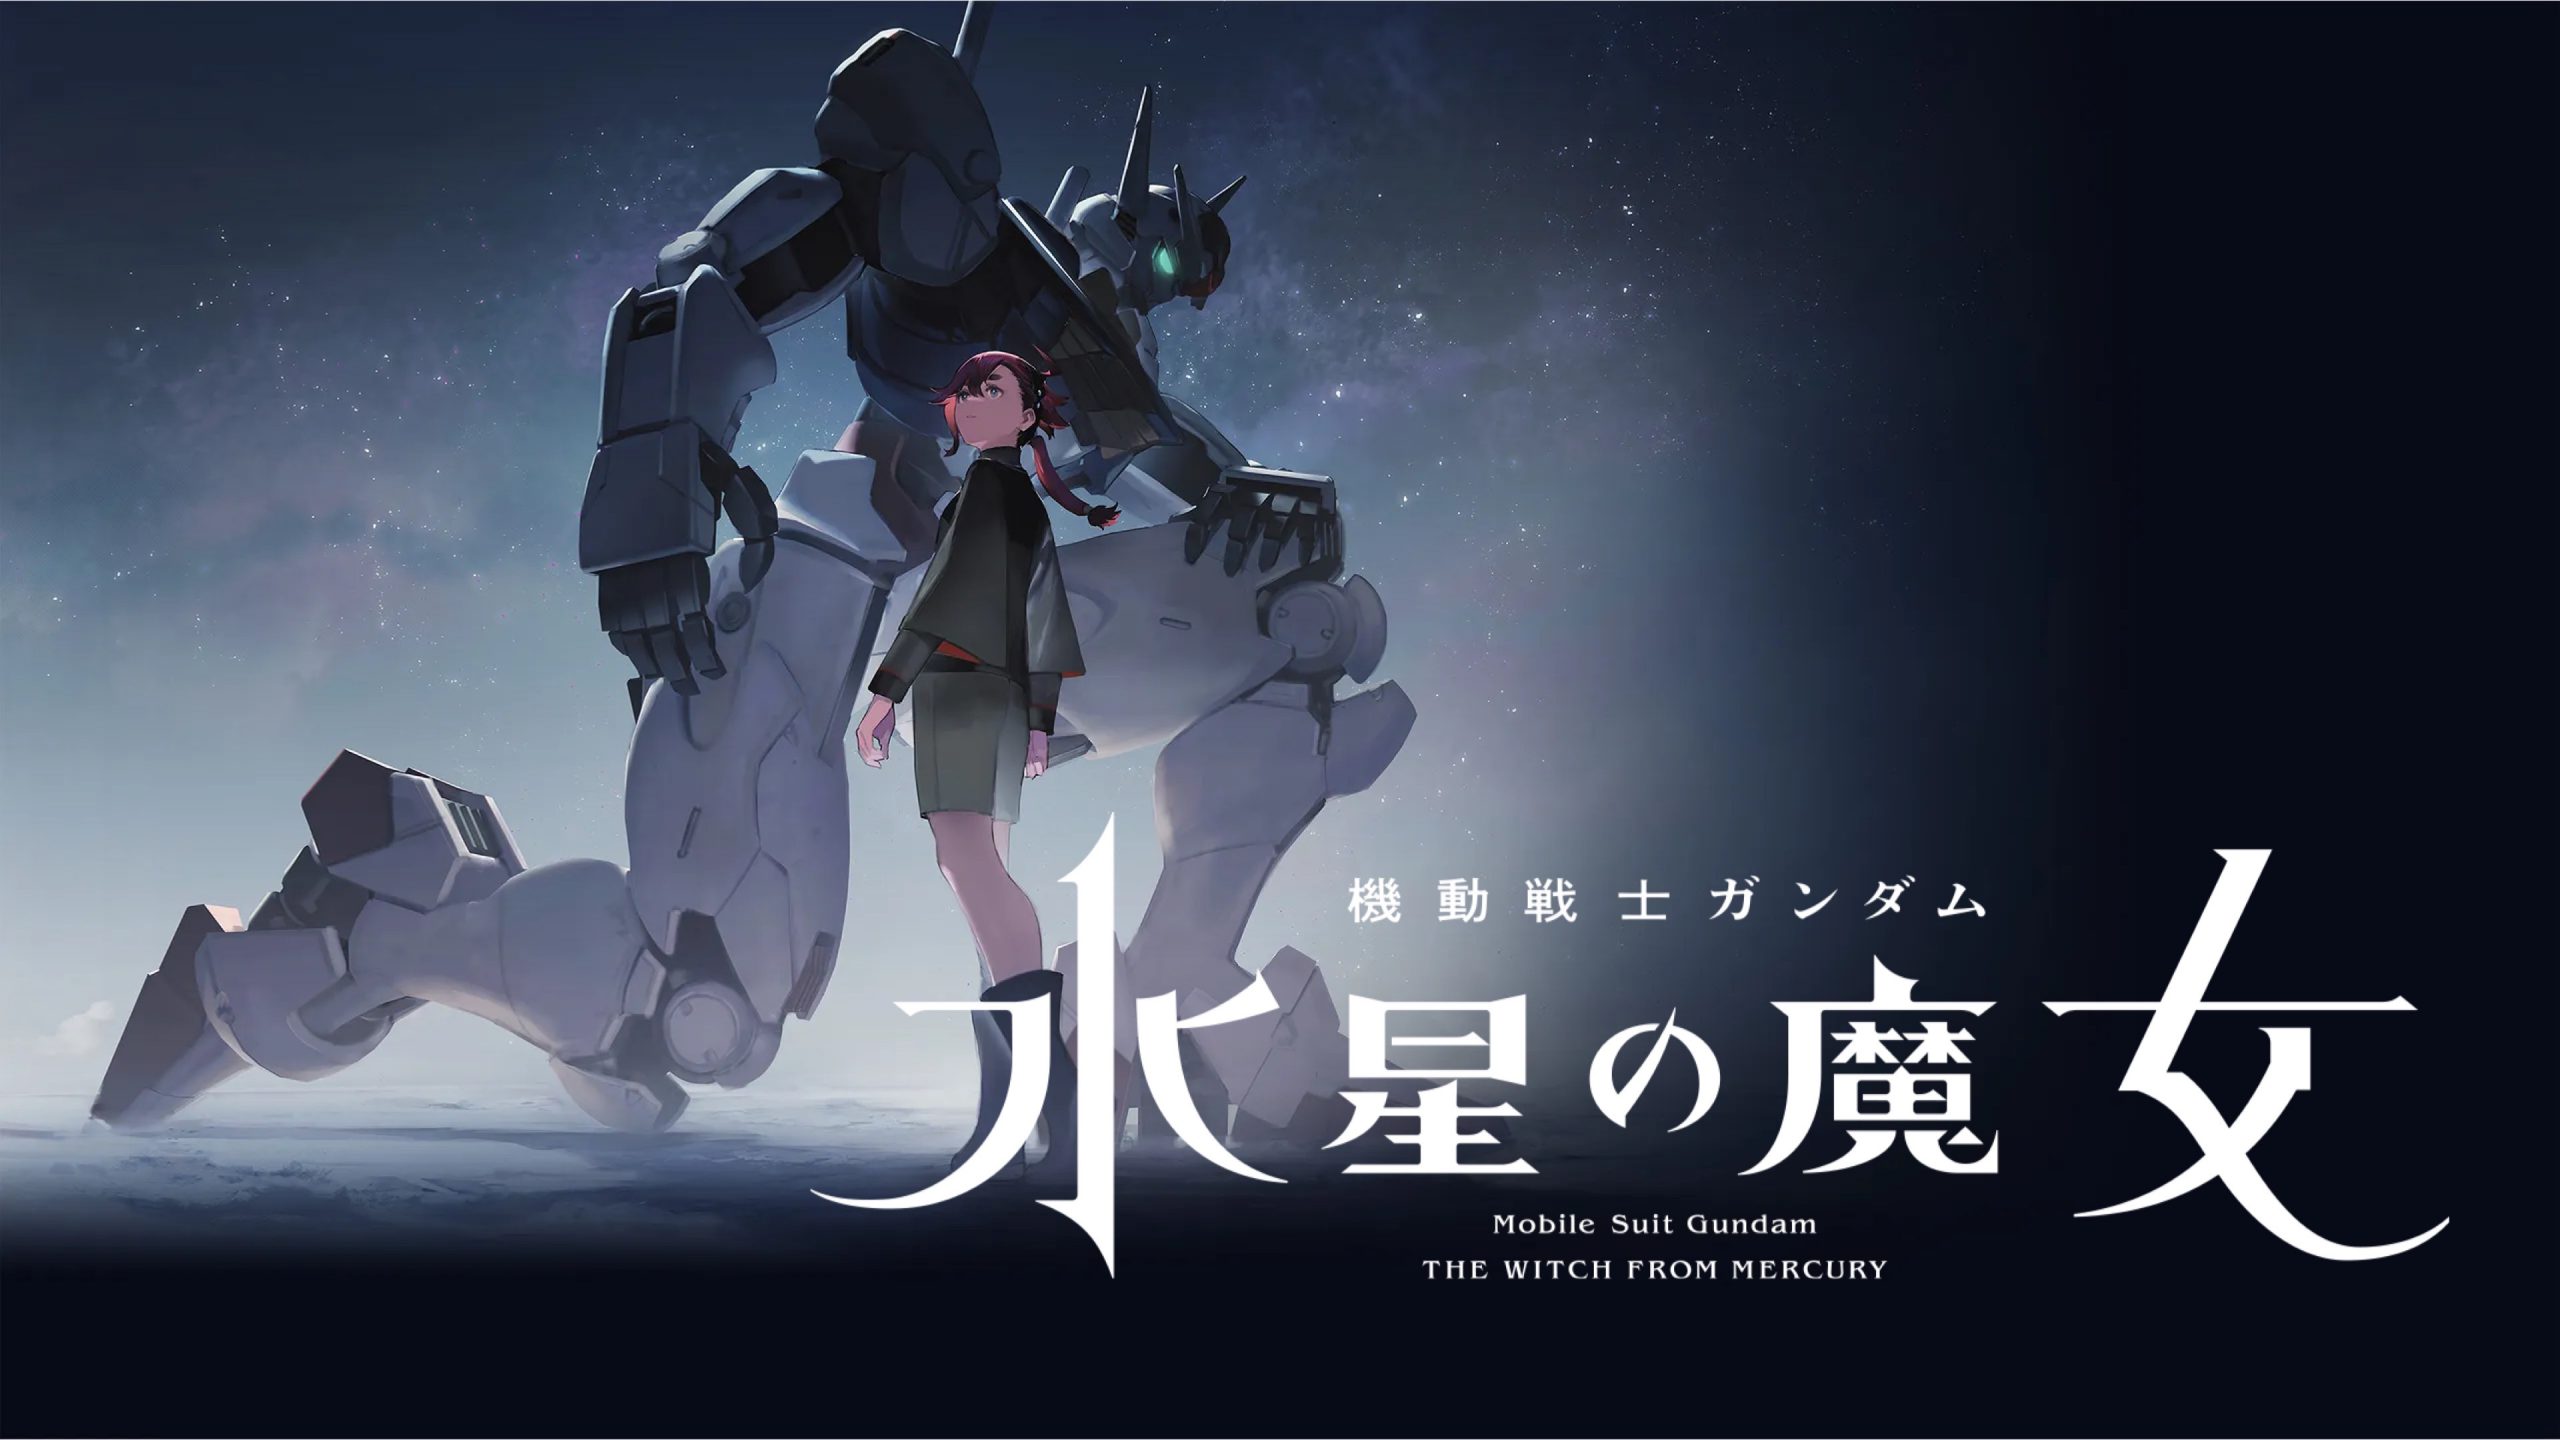 Gundam: The Witch from Mercury Releases Smartphone Wallpaper